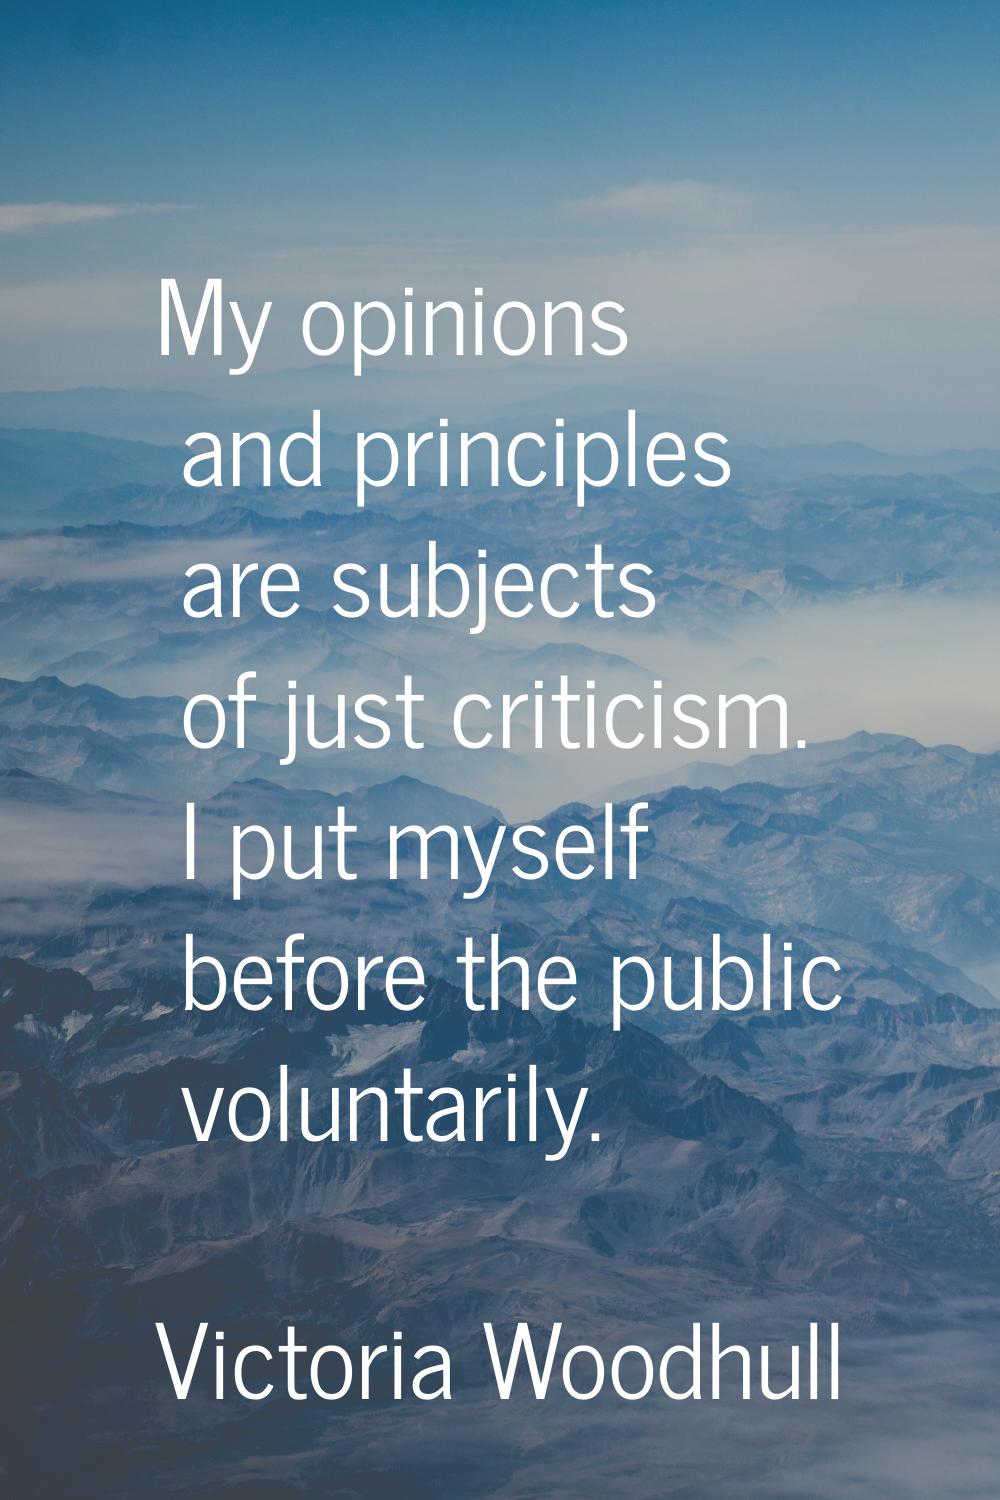 My opinions and principles are subjects of just criticism. I put myself before the public voluntari